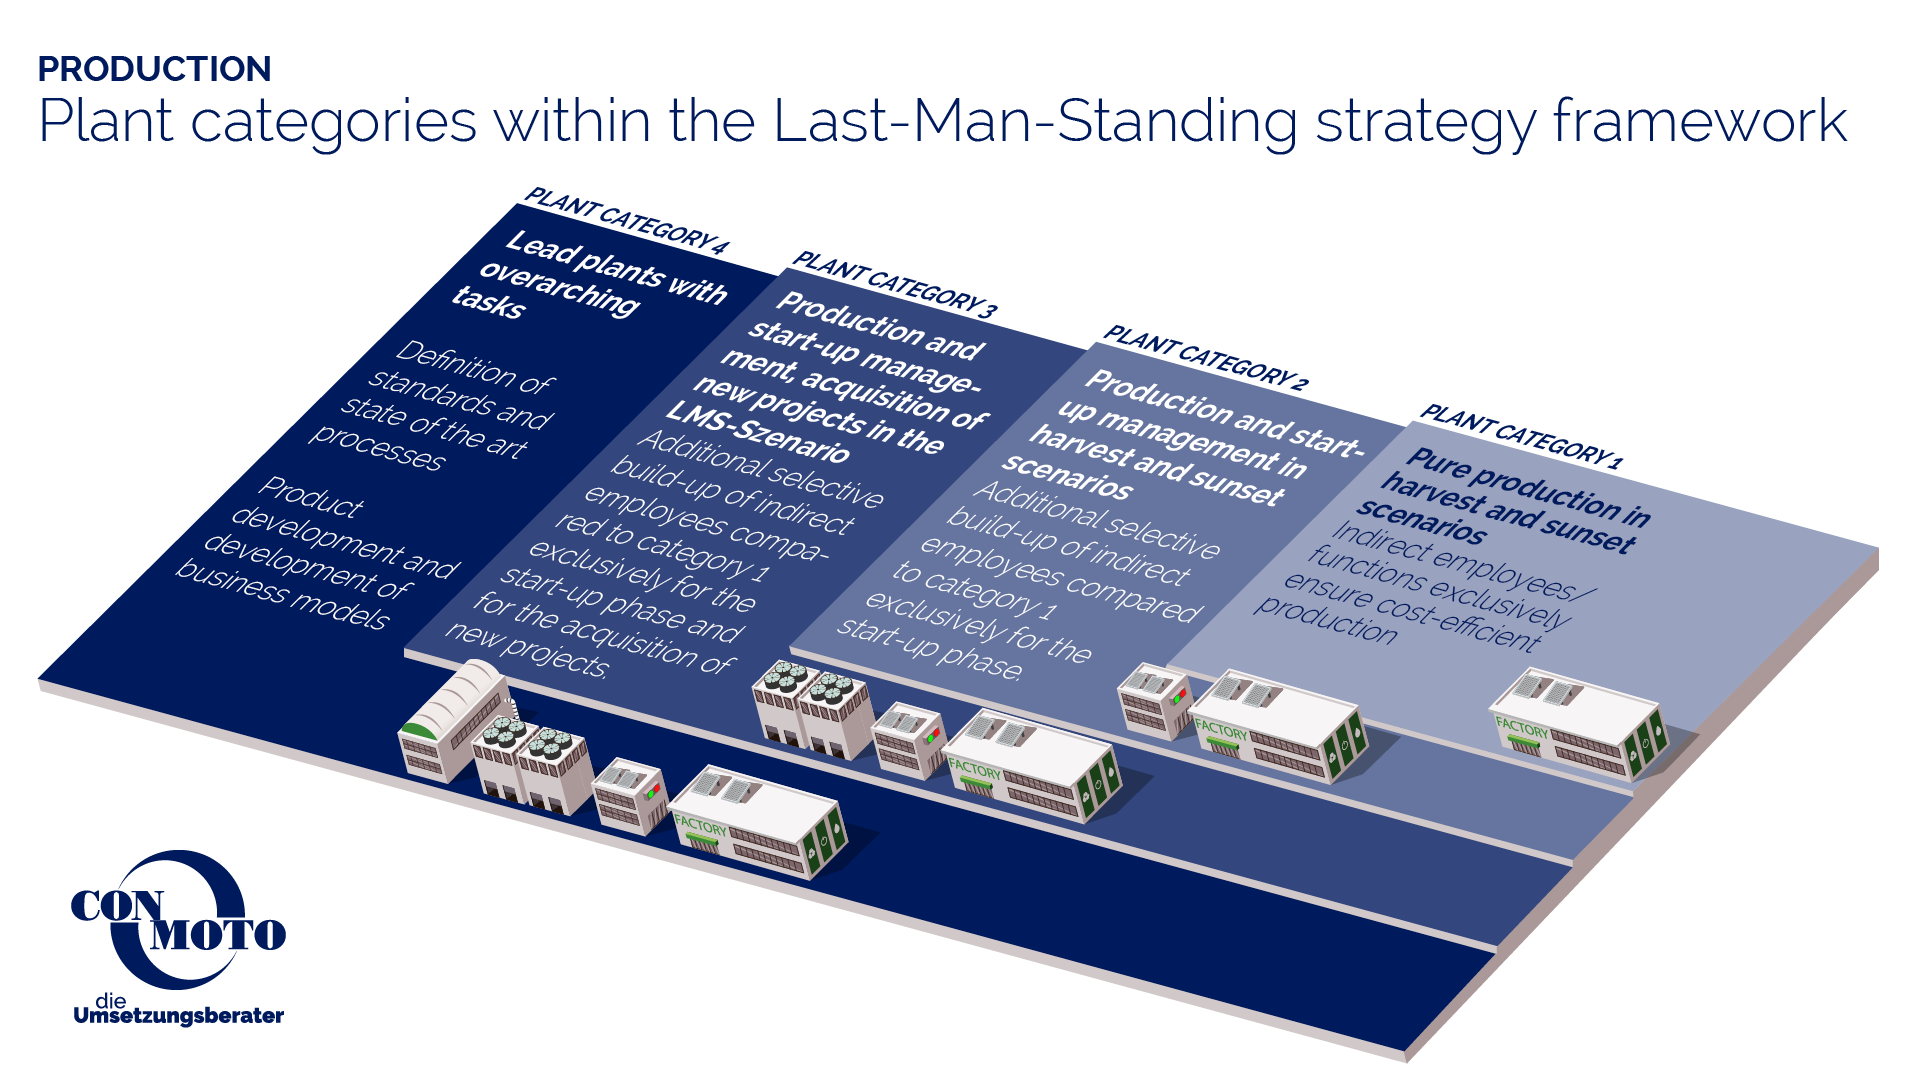 Plant categories within the Last-Man-Standing strategy framework